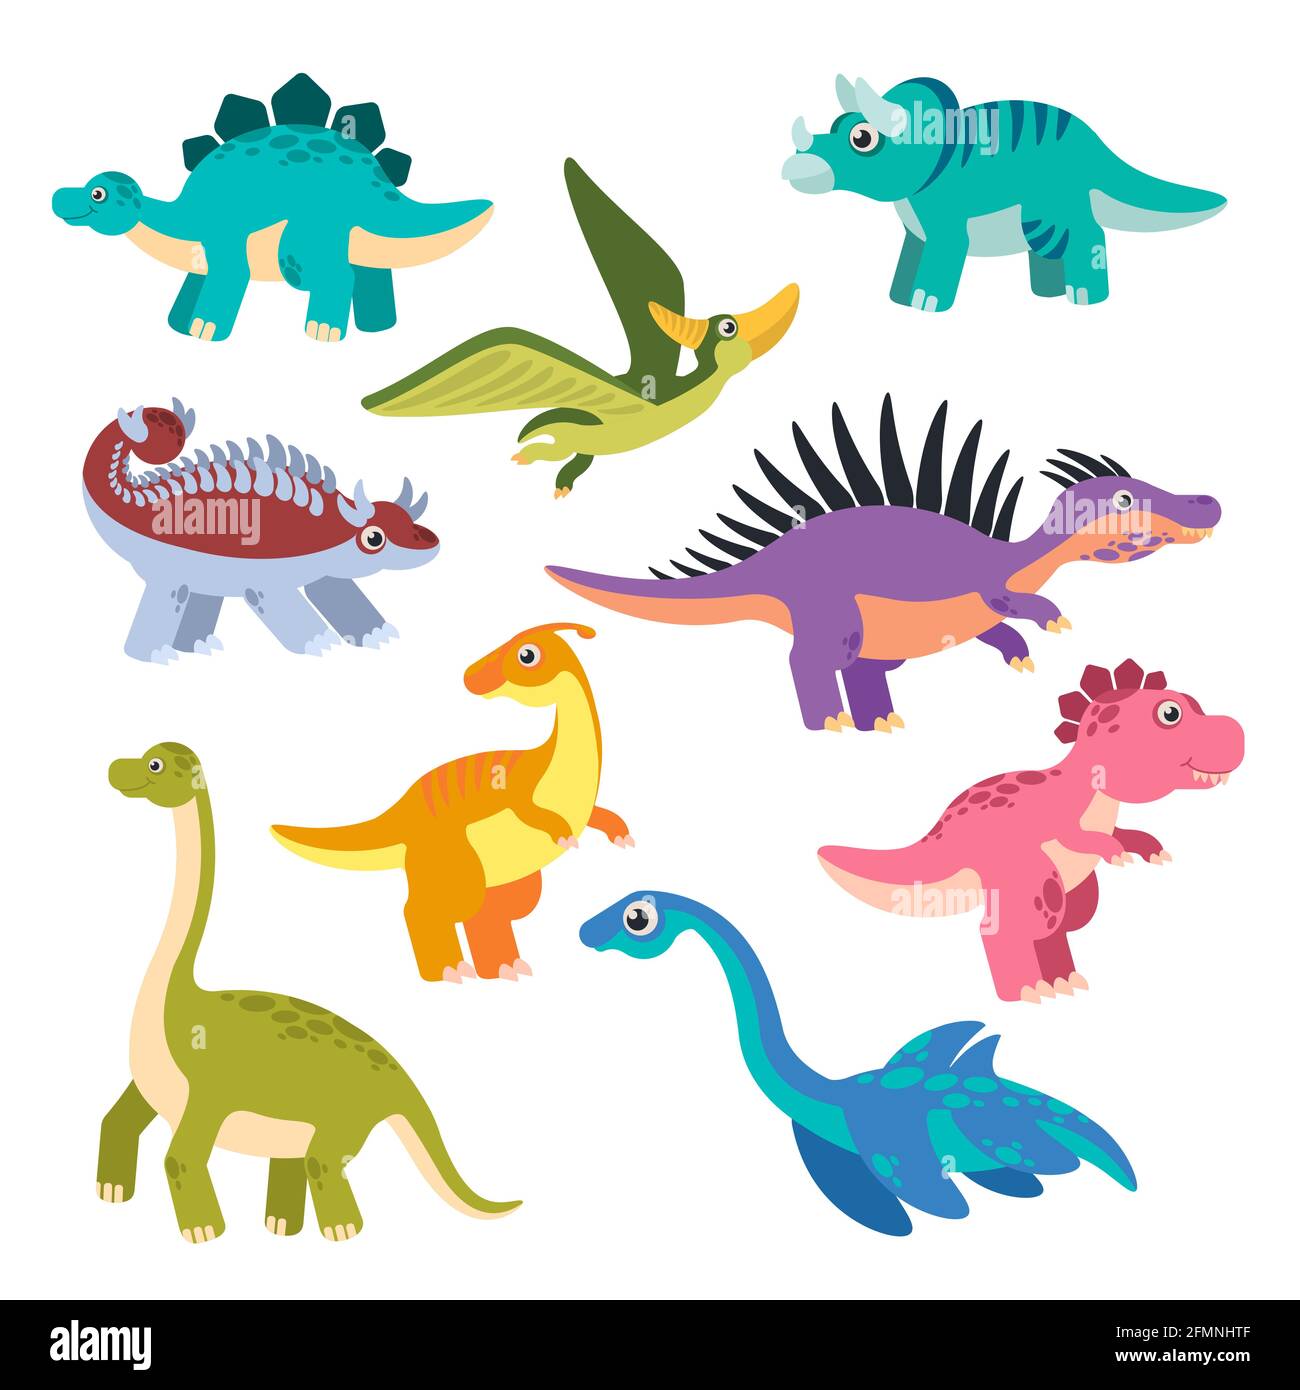 Cute dino. Cartoon dinosaurs, baby dragons, prehistoric monsters. Funny jurassic animals vector childish isolated characters. Dino party decoration, children holiday creature decor Stock Vector